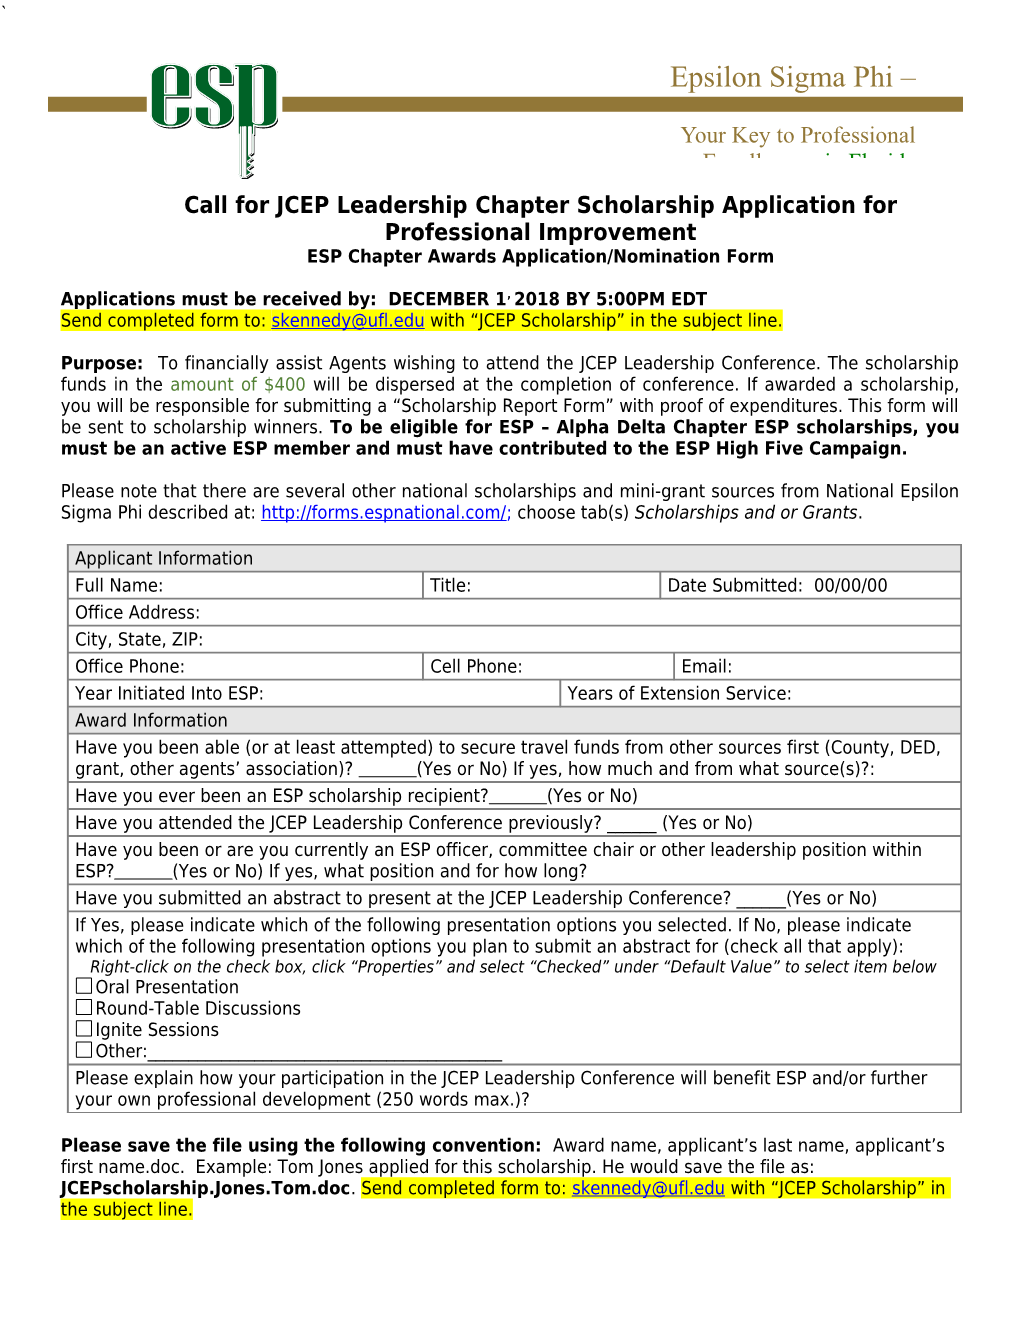 Call for JCEP Leadership Chapter Scholarship Application for Professional Improvement